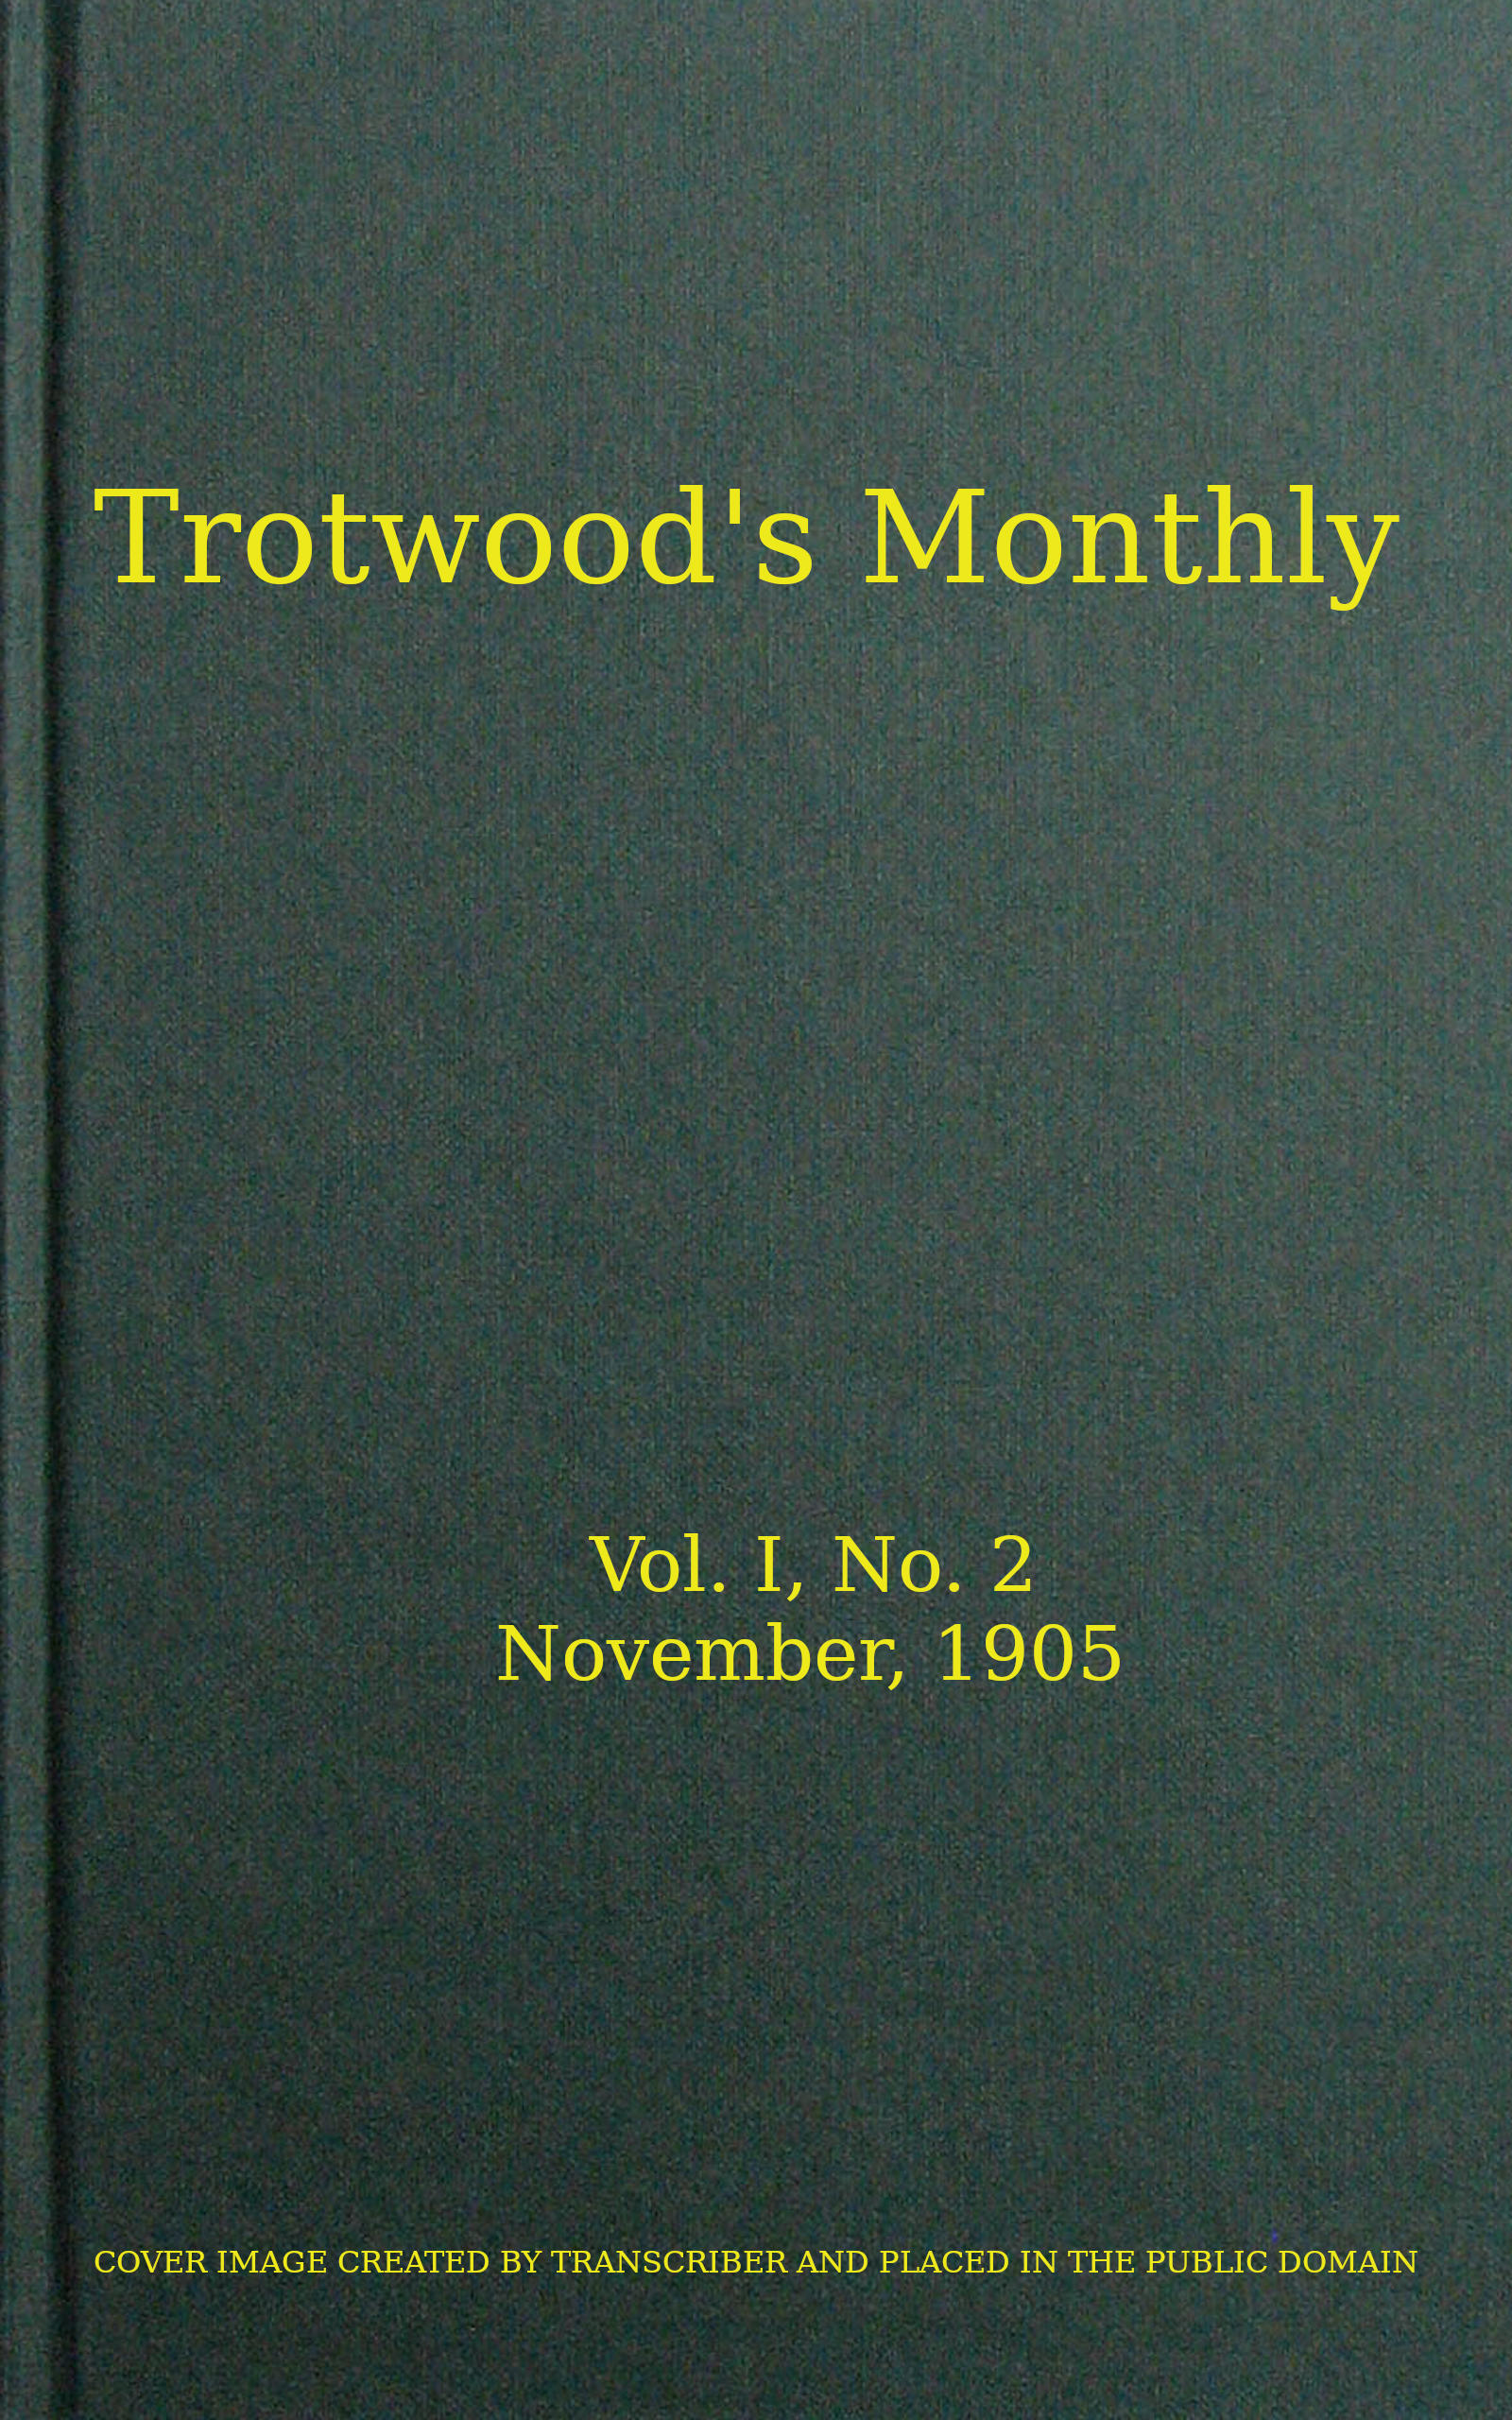 Trotwood's Monthly, Vol. I, No. 2, November 1905